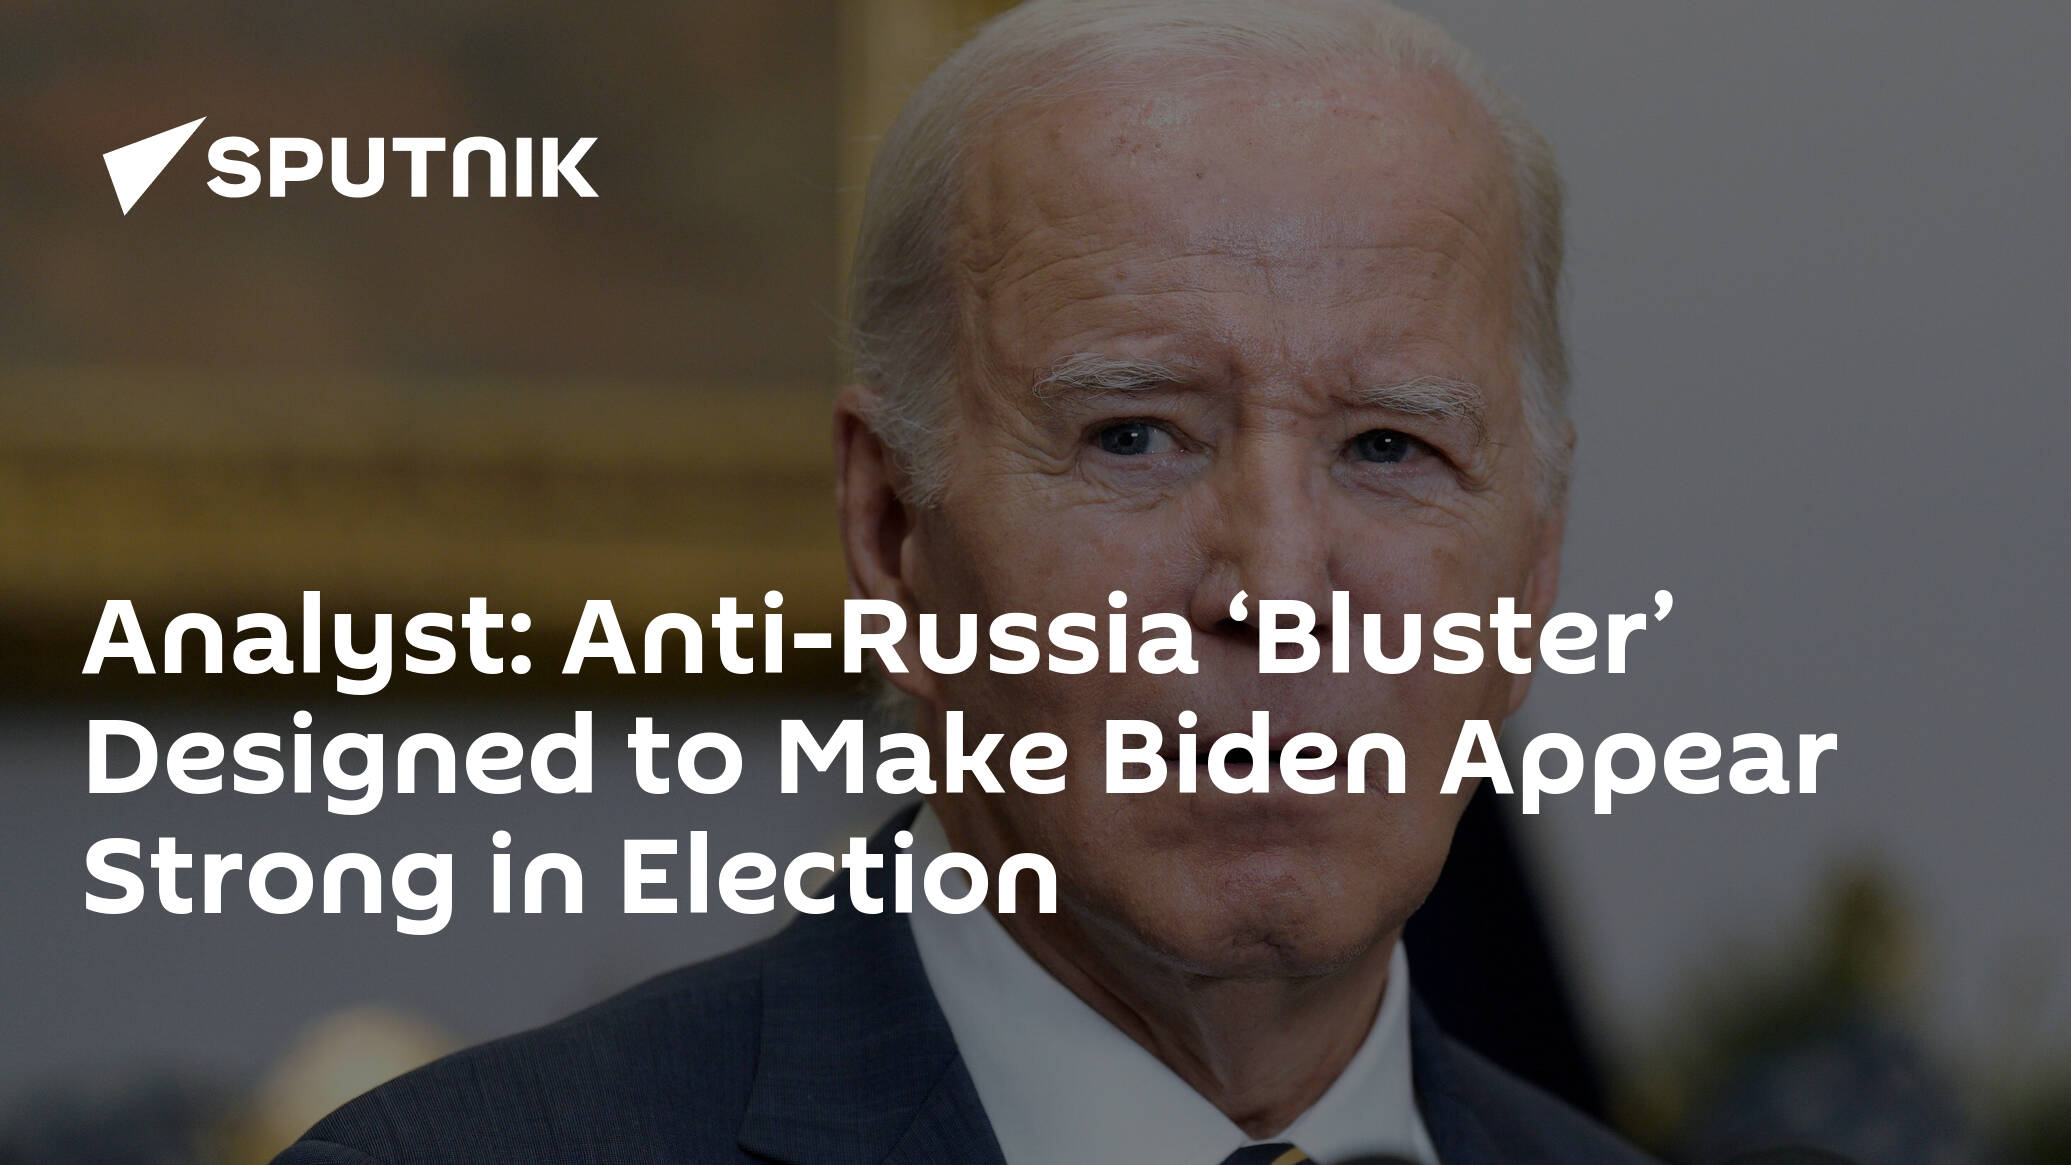 Analyst Anti-Russia Bluster Designed to Make Biden Appear Strong in